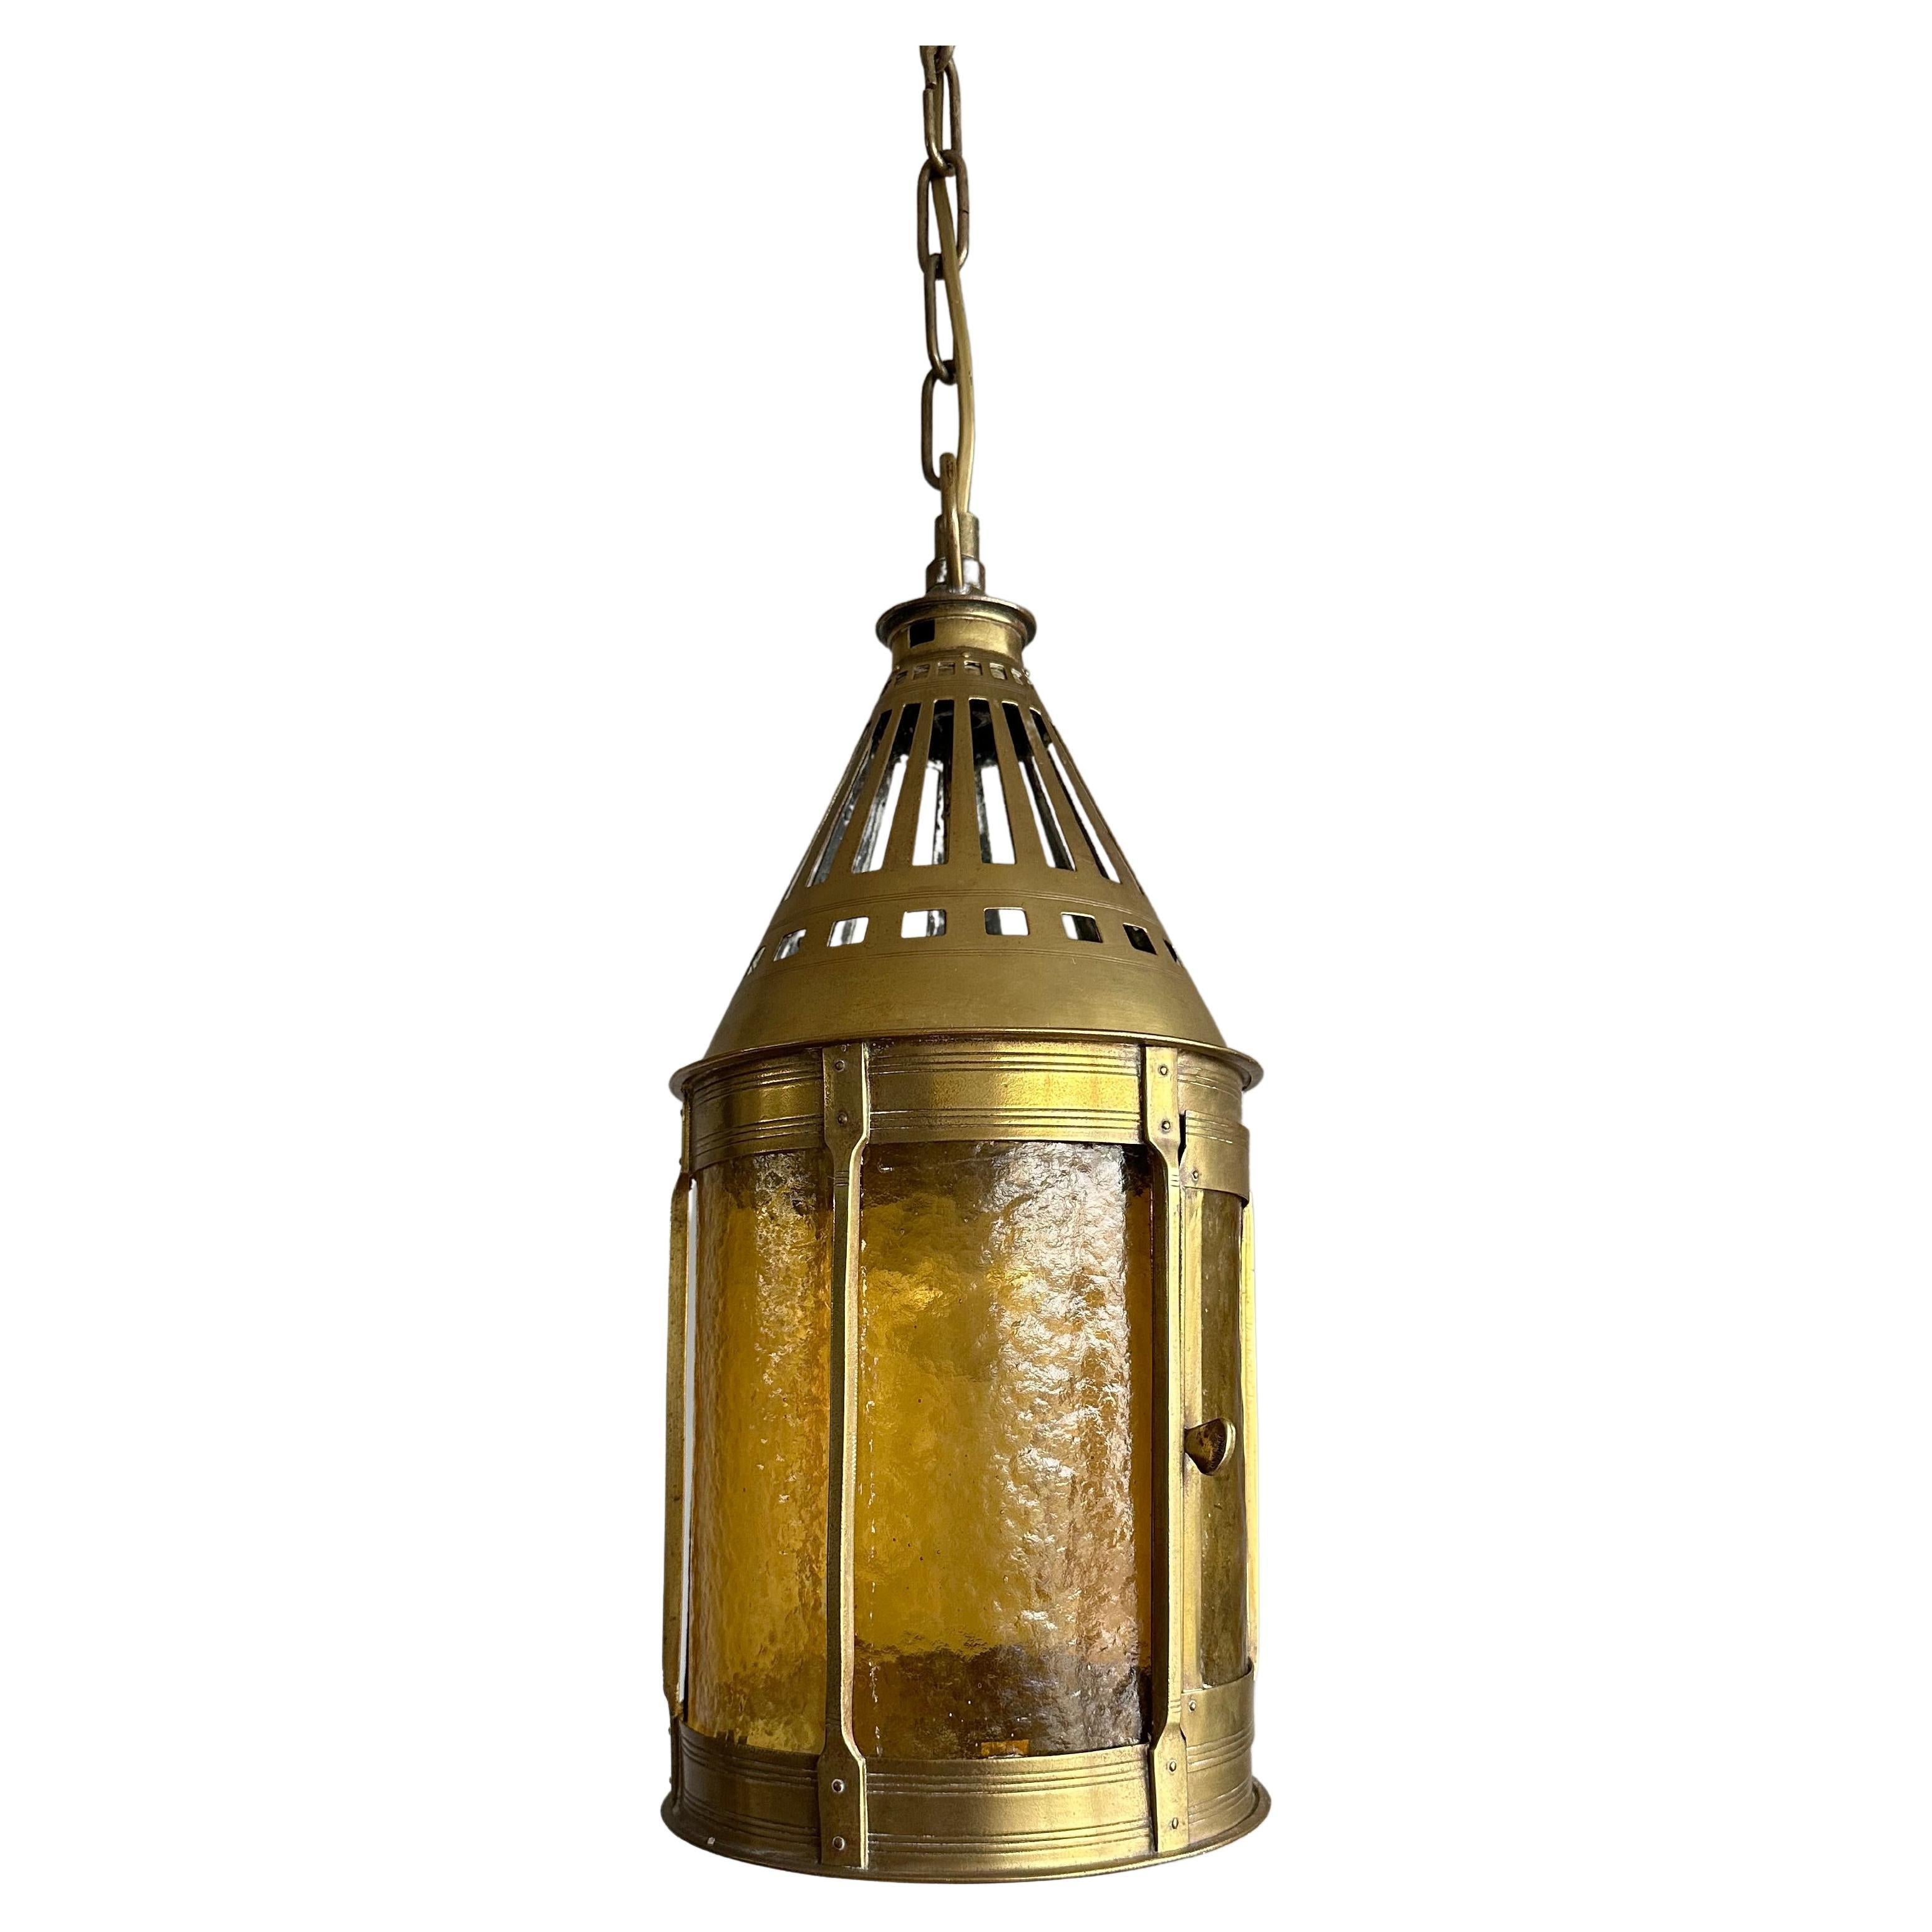 Rare Arts & Crafts Round Shape Entrance Hall Lantern Pendant by Jan Eisenloeffel In Good Condition For Sale In Lisse, NL